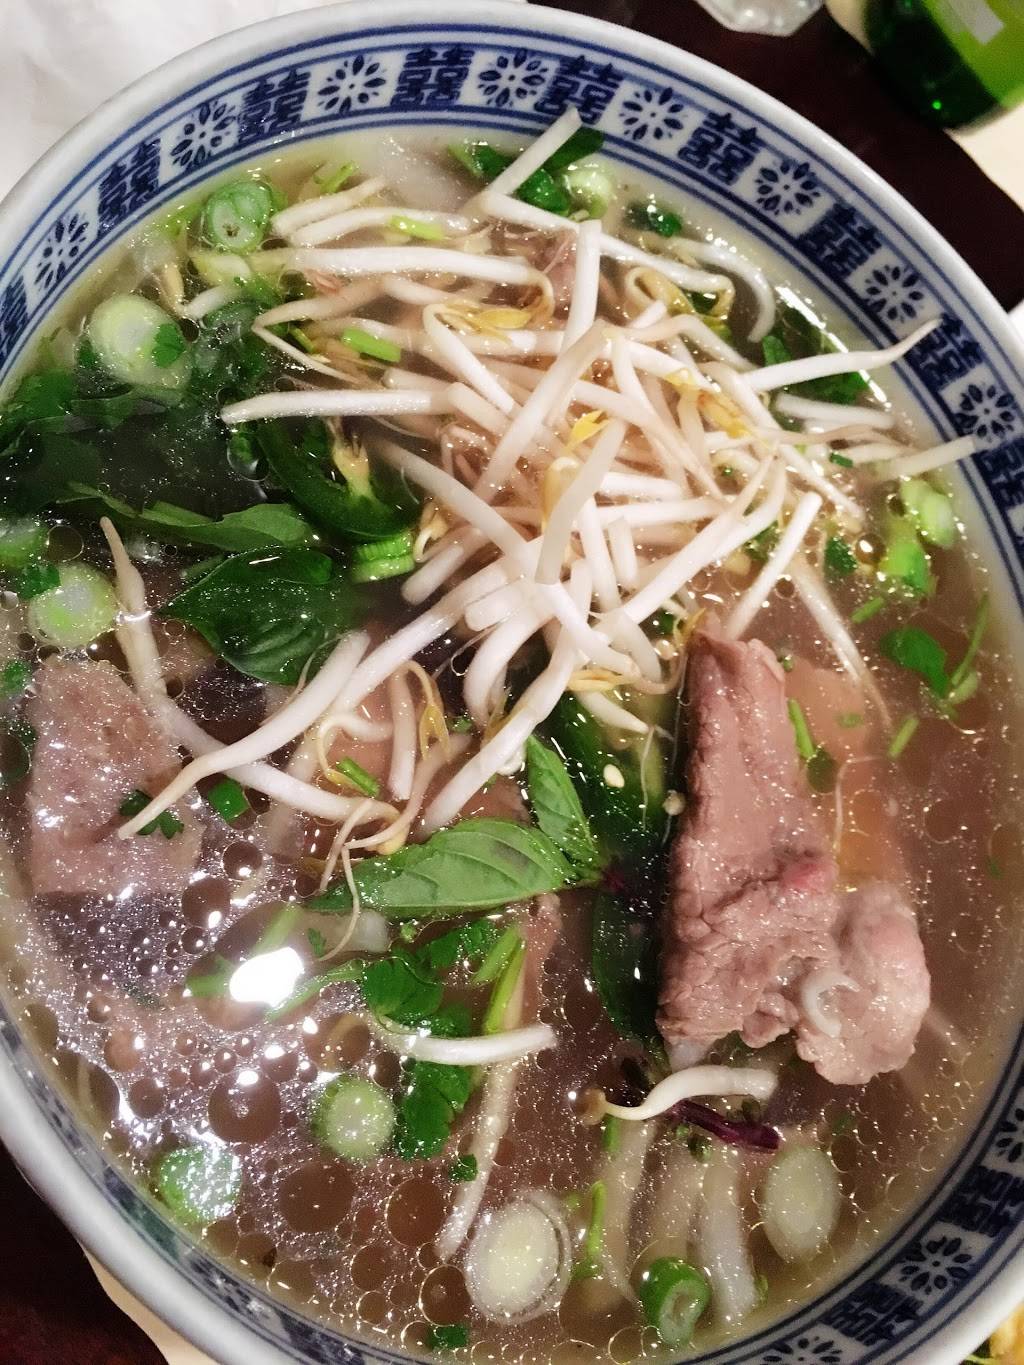 Pho Viet & Grille | restaurant | 2721, 1639 Wisconsin Ave NW, Washington, DC 20007, USA | 2023330009 OR +1 202-333-0009